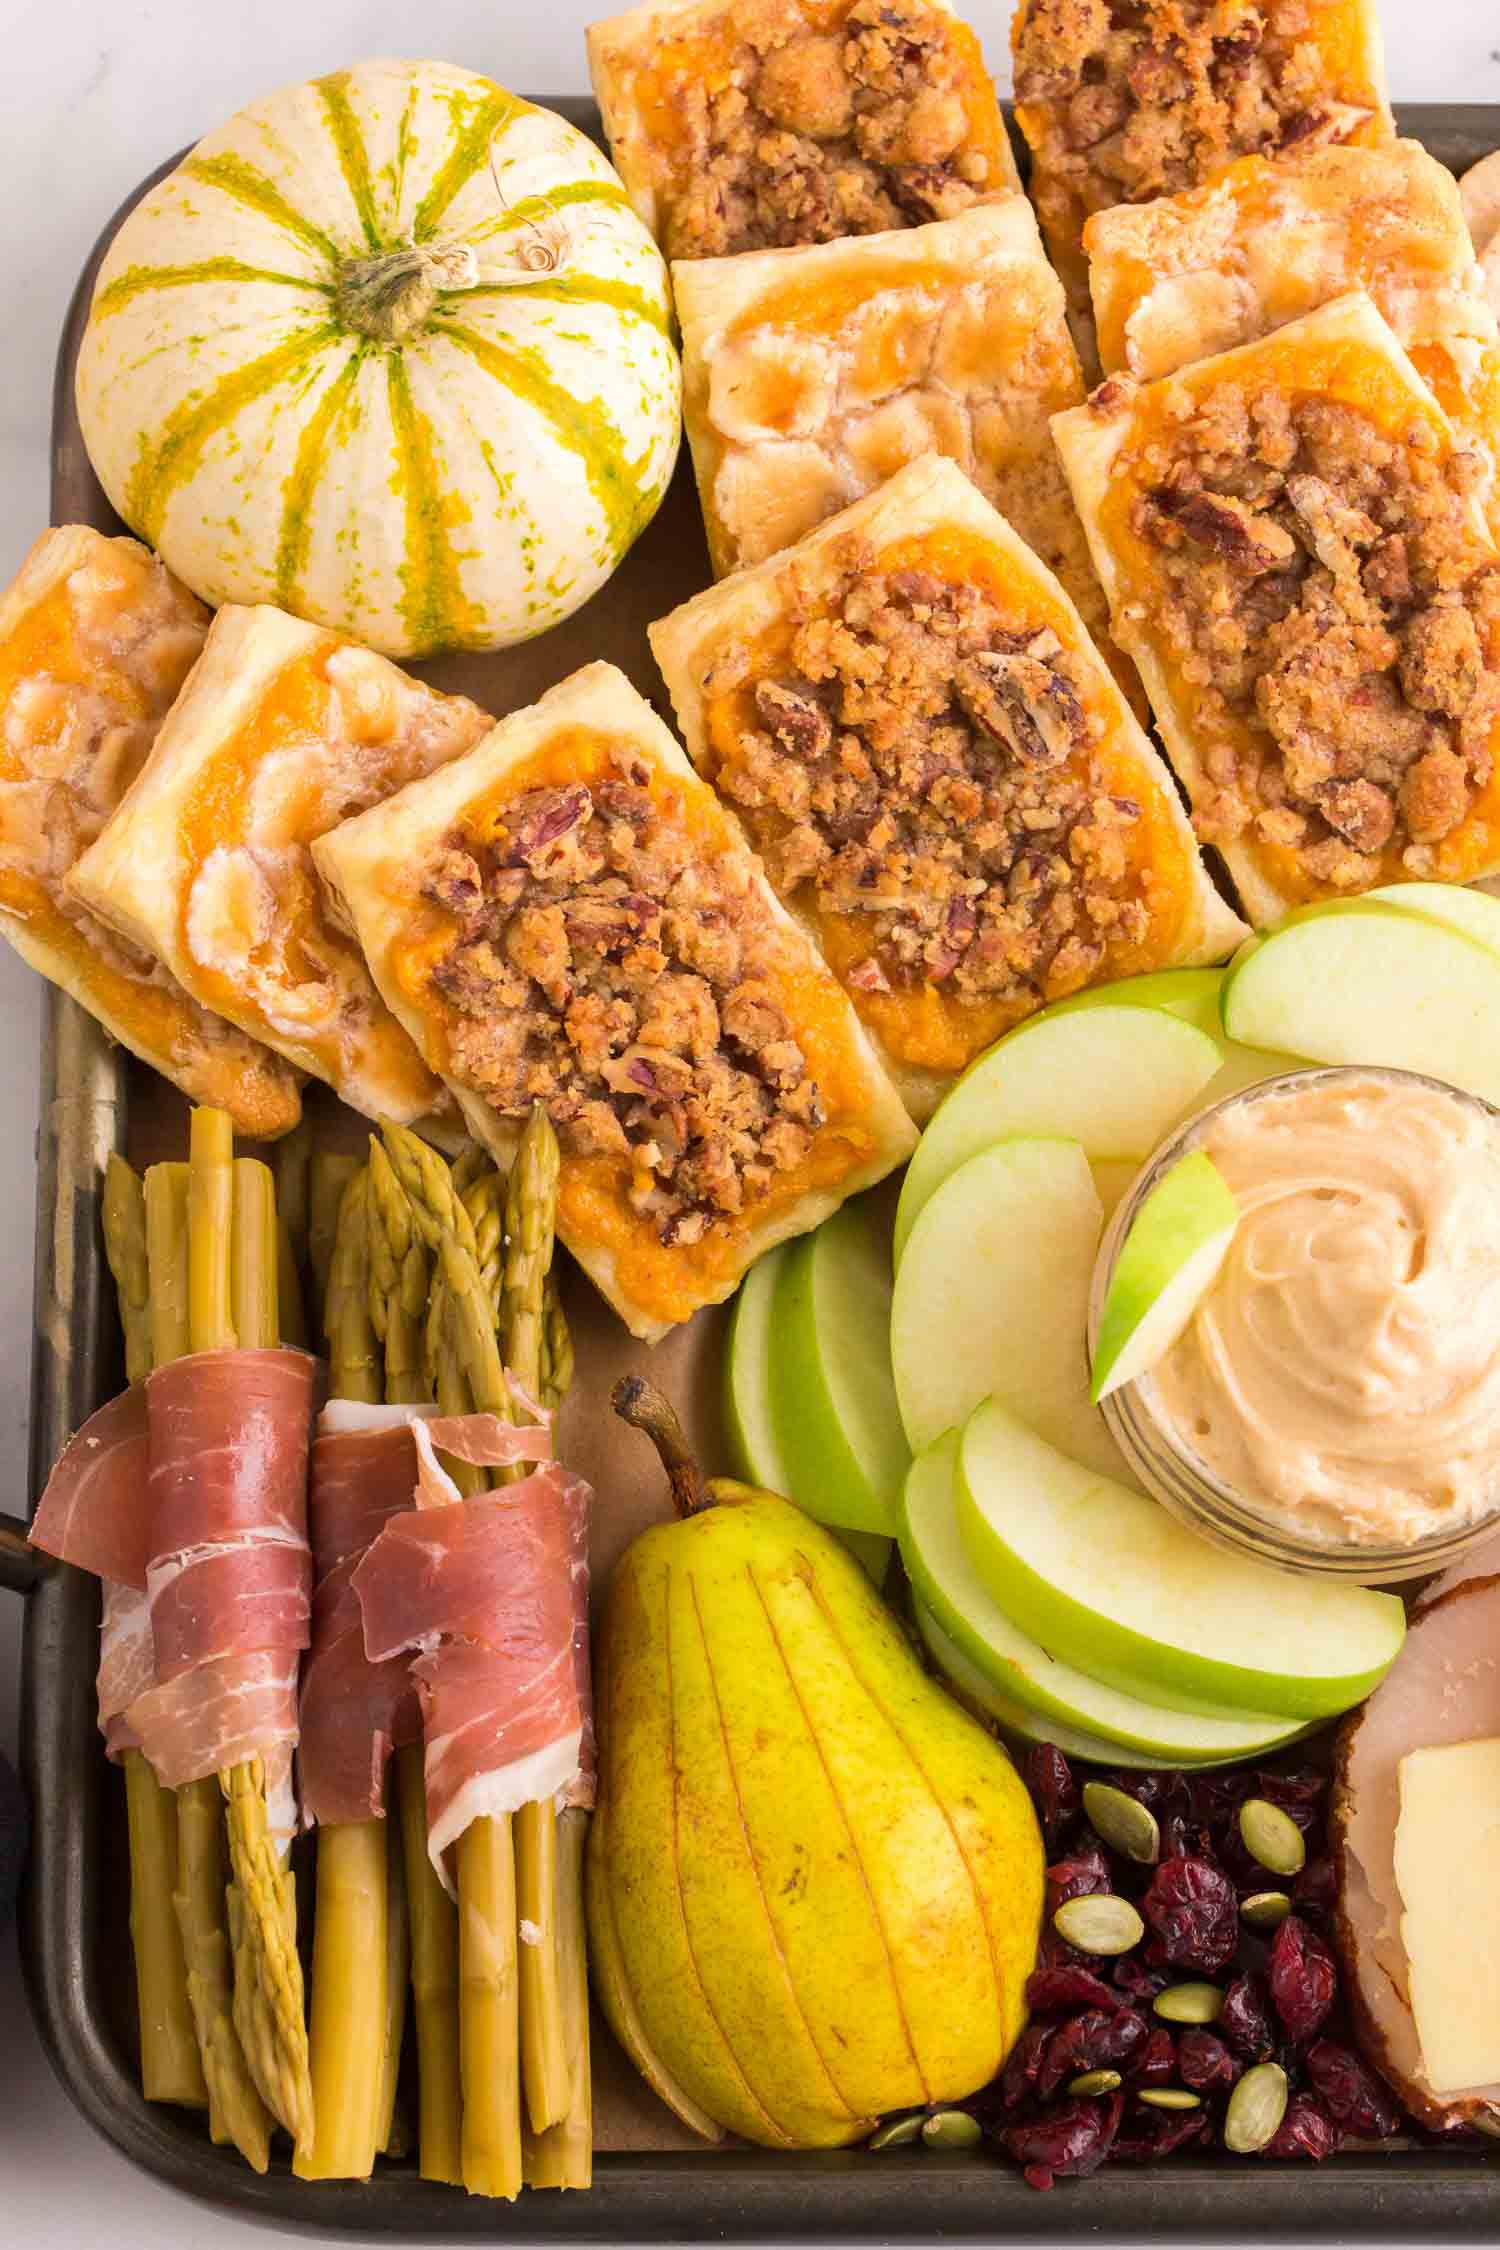 A platter with sweet potato pastries, a white pumpkin. meat wrapped asparagus, cut pear, cut apples and apple dip, and nuts.